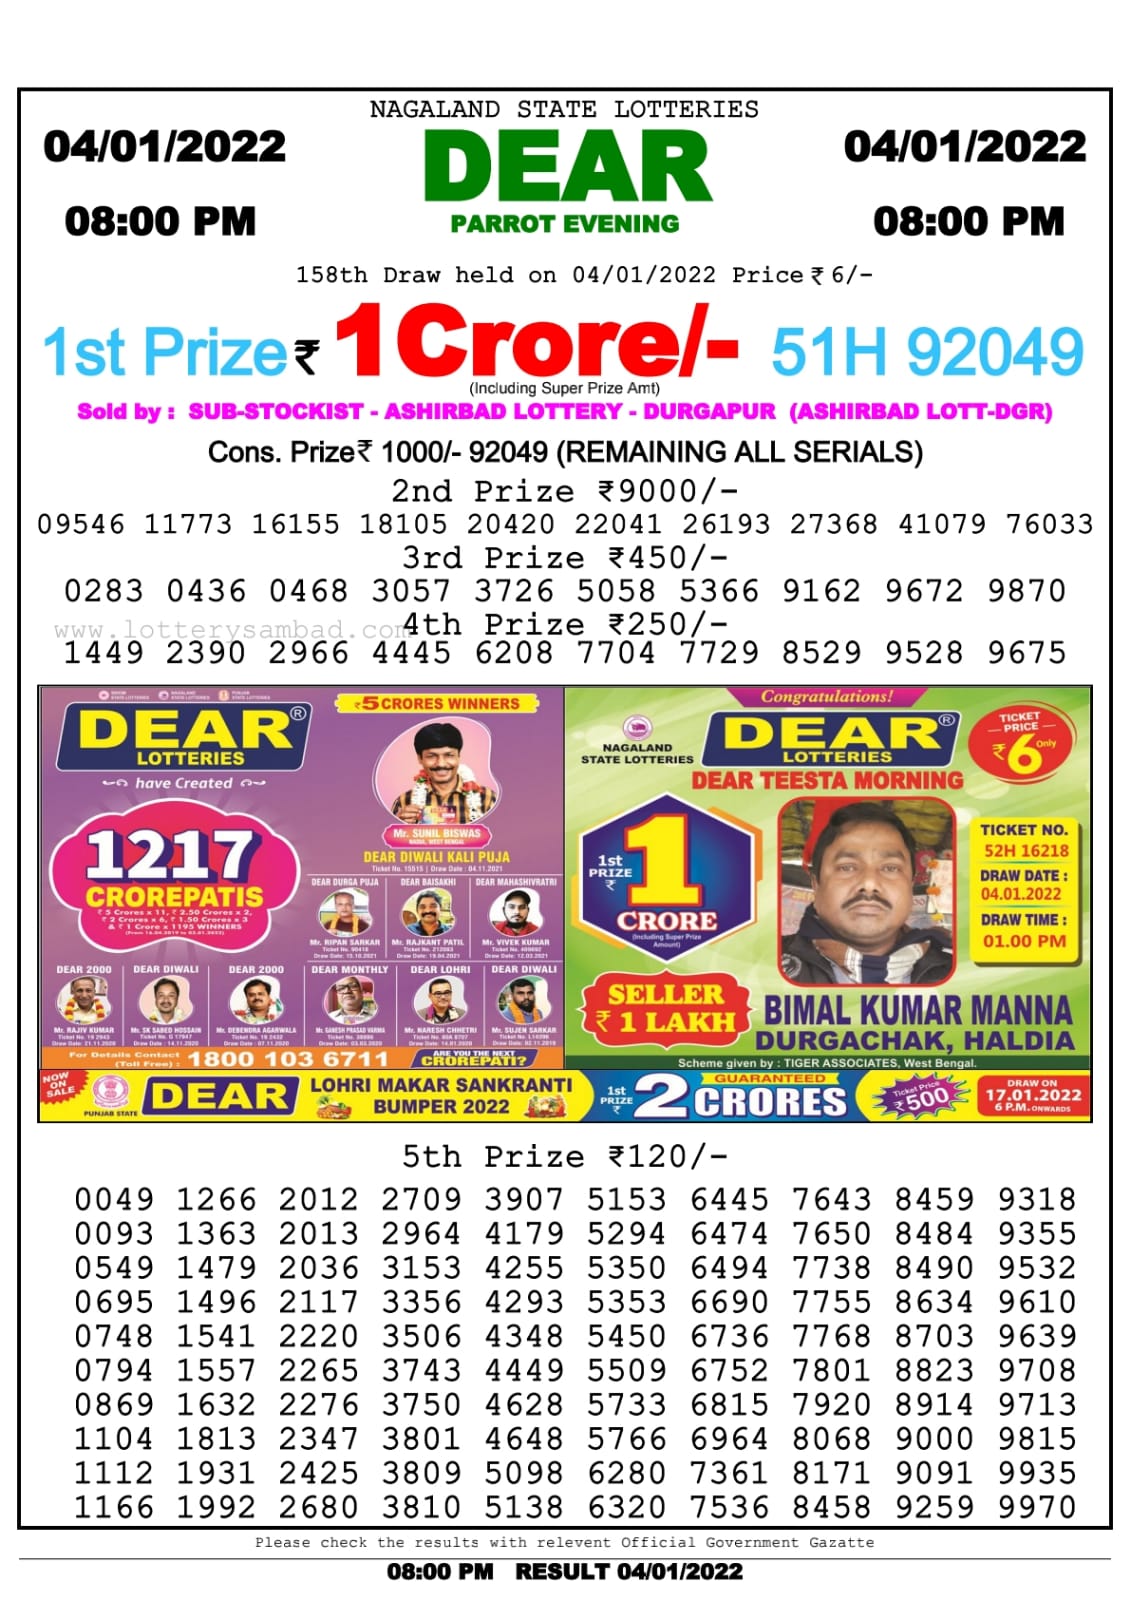 Dear Lottery Nagaland state Lottery Results 8.00 PM 04/01/2022